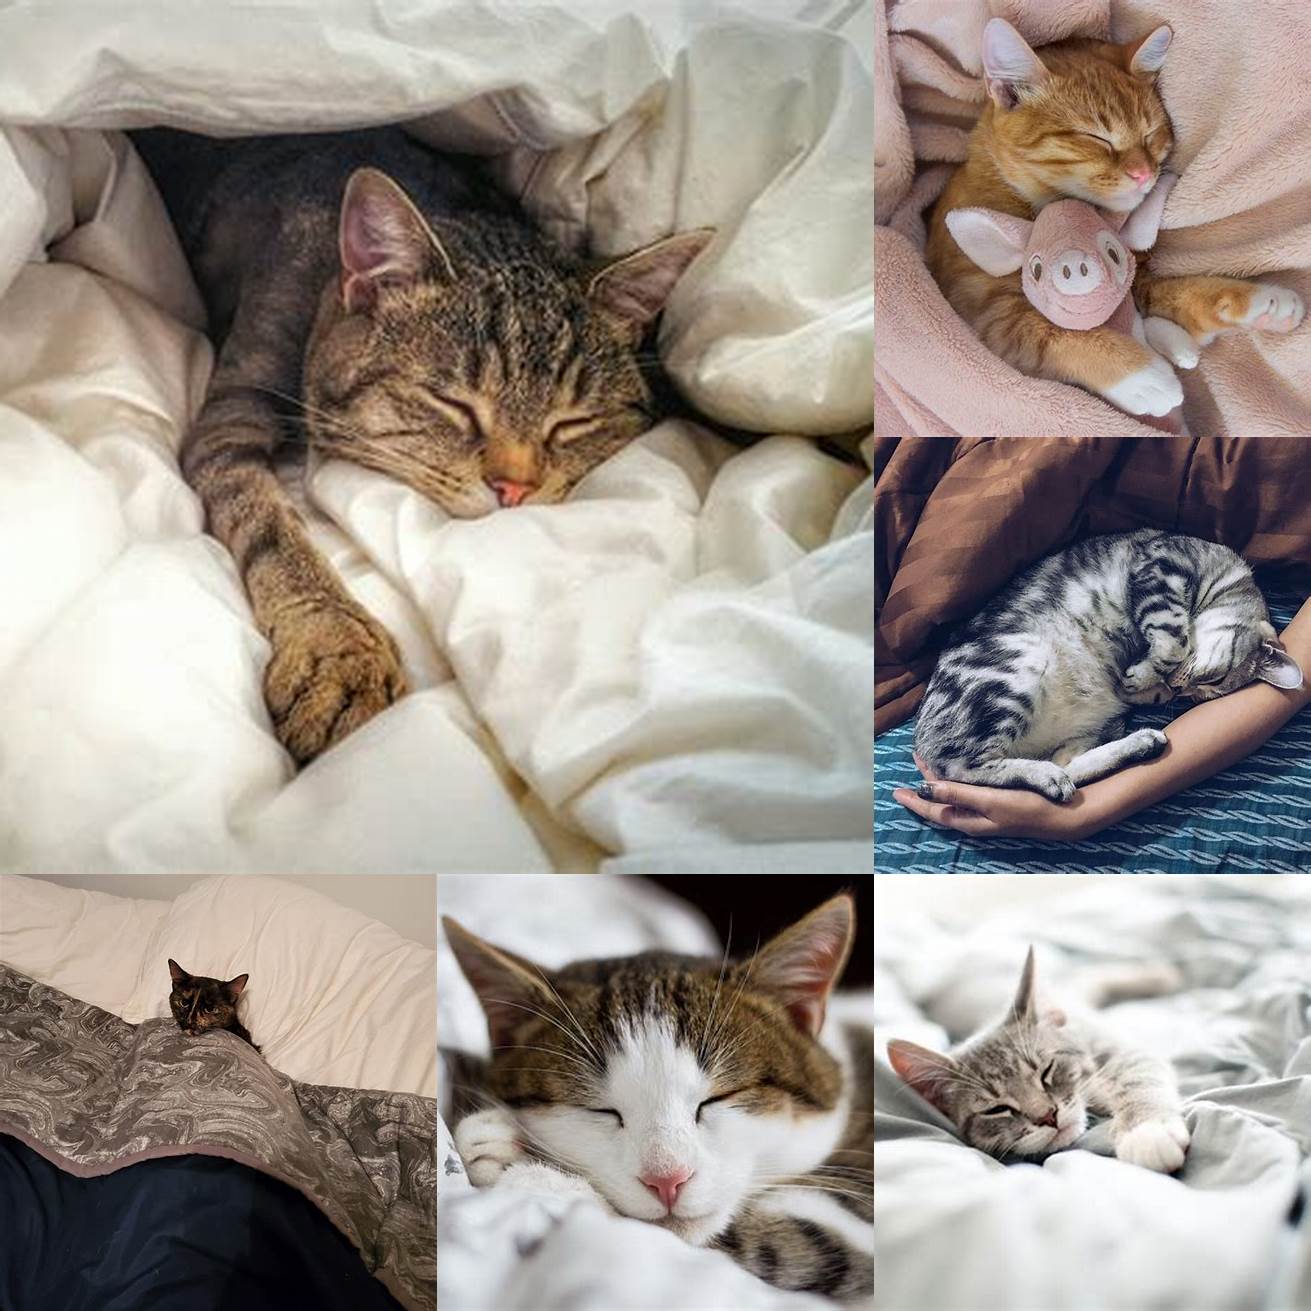 Image of a cat sleeping in a warm bed